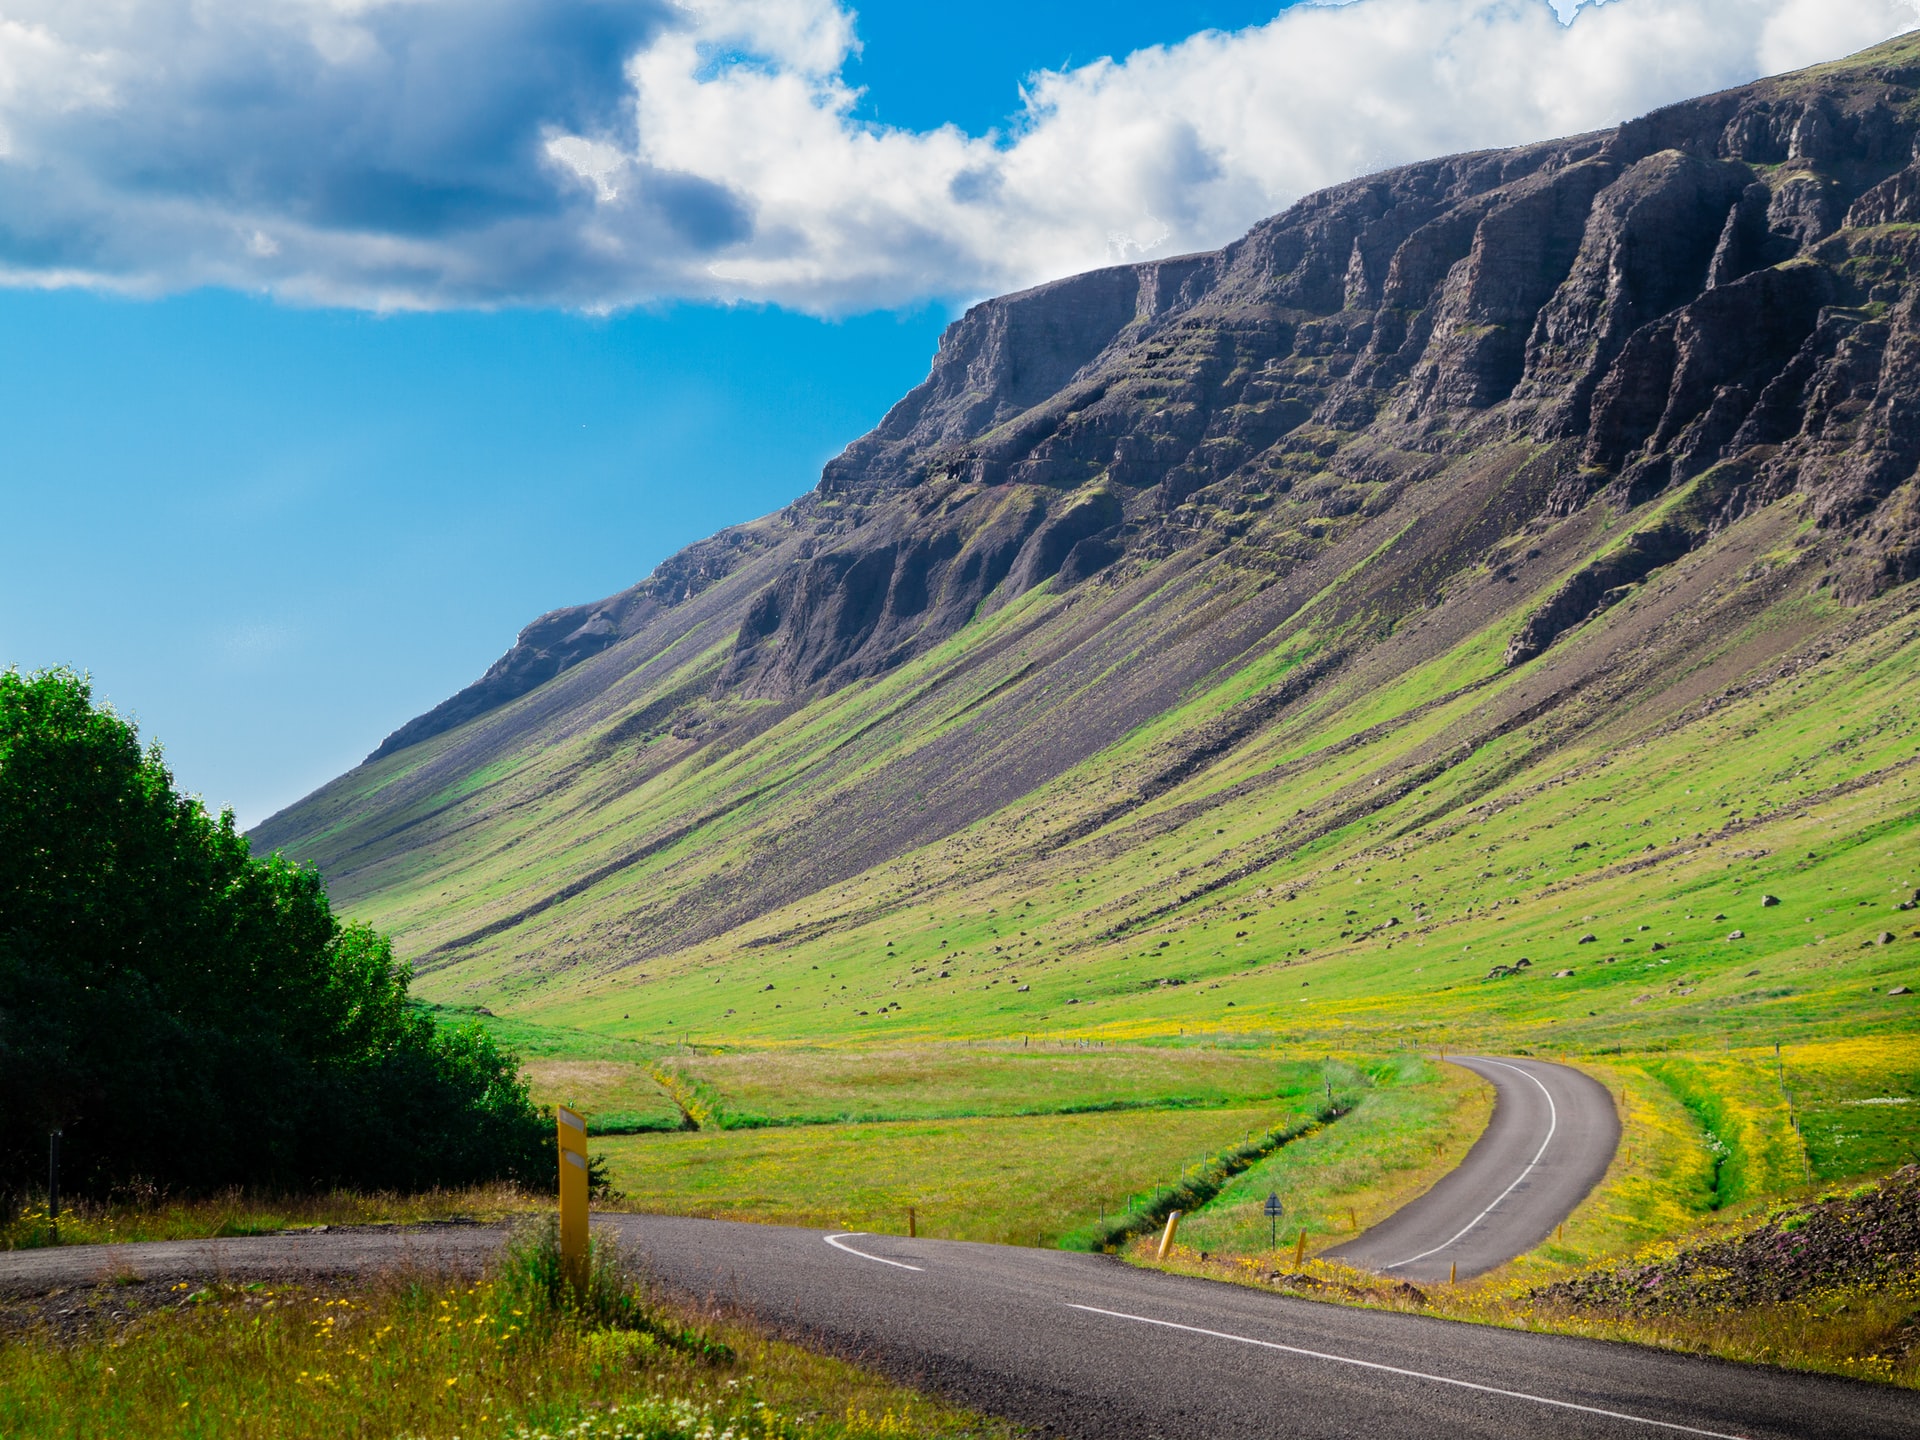 What to take for a summer trip to Iceland?